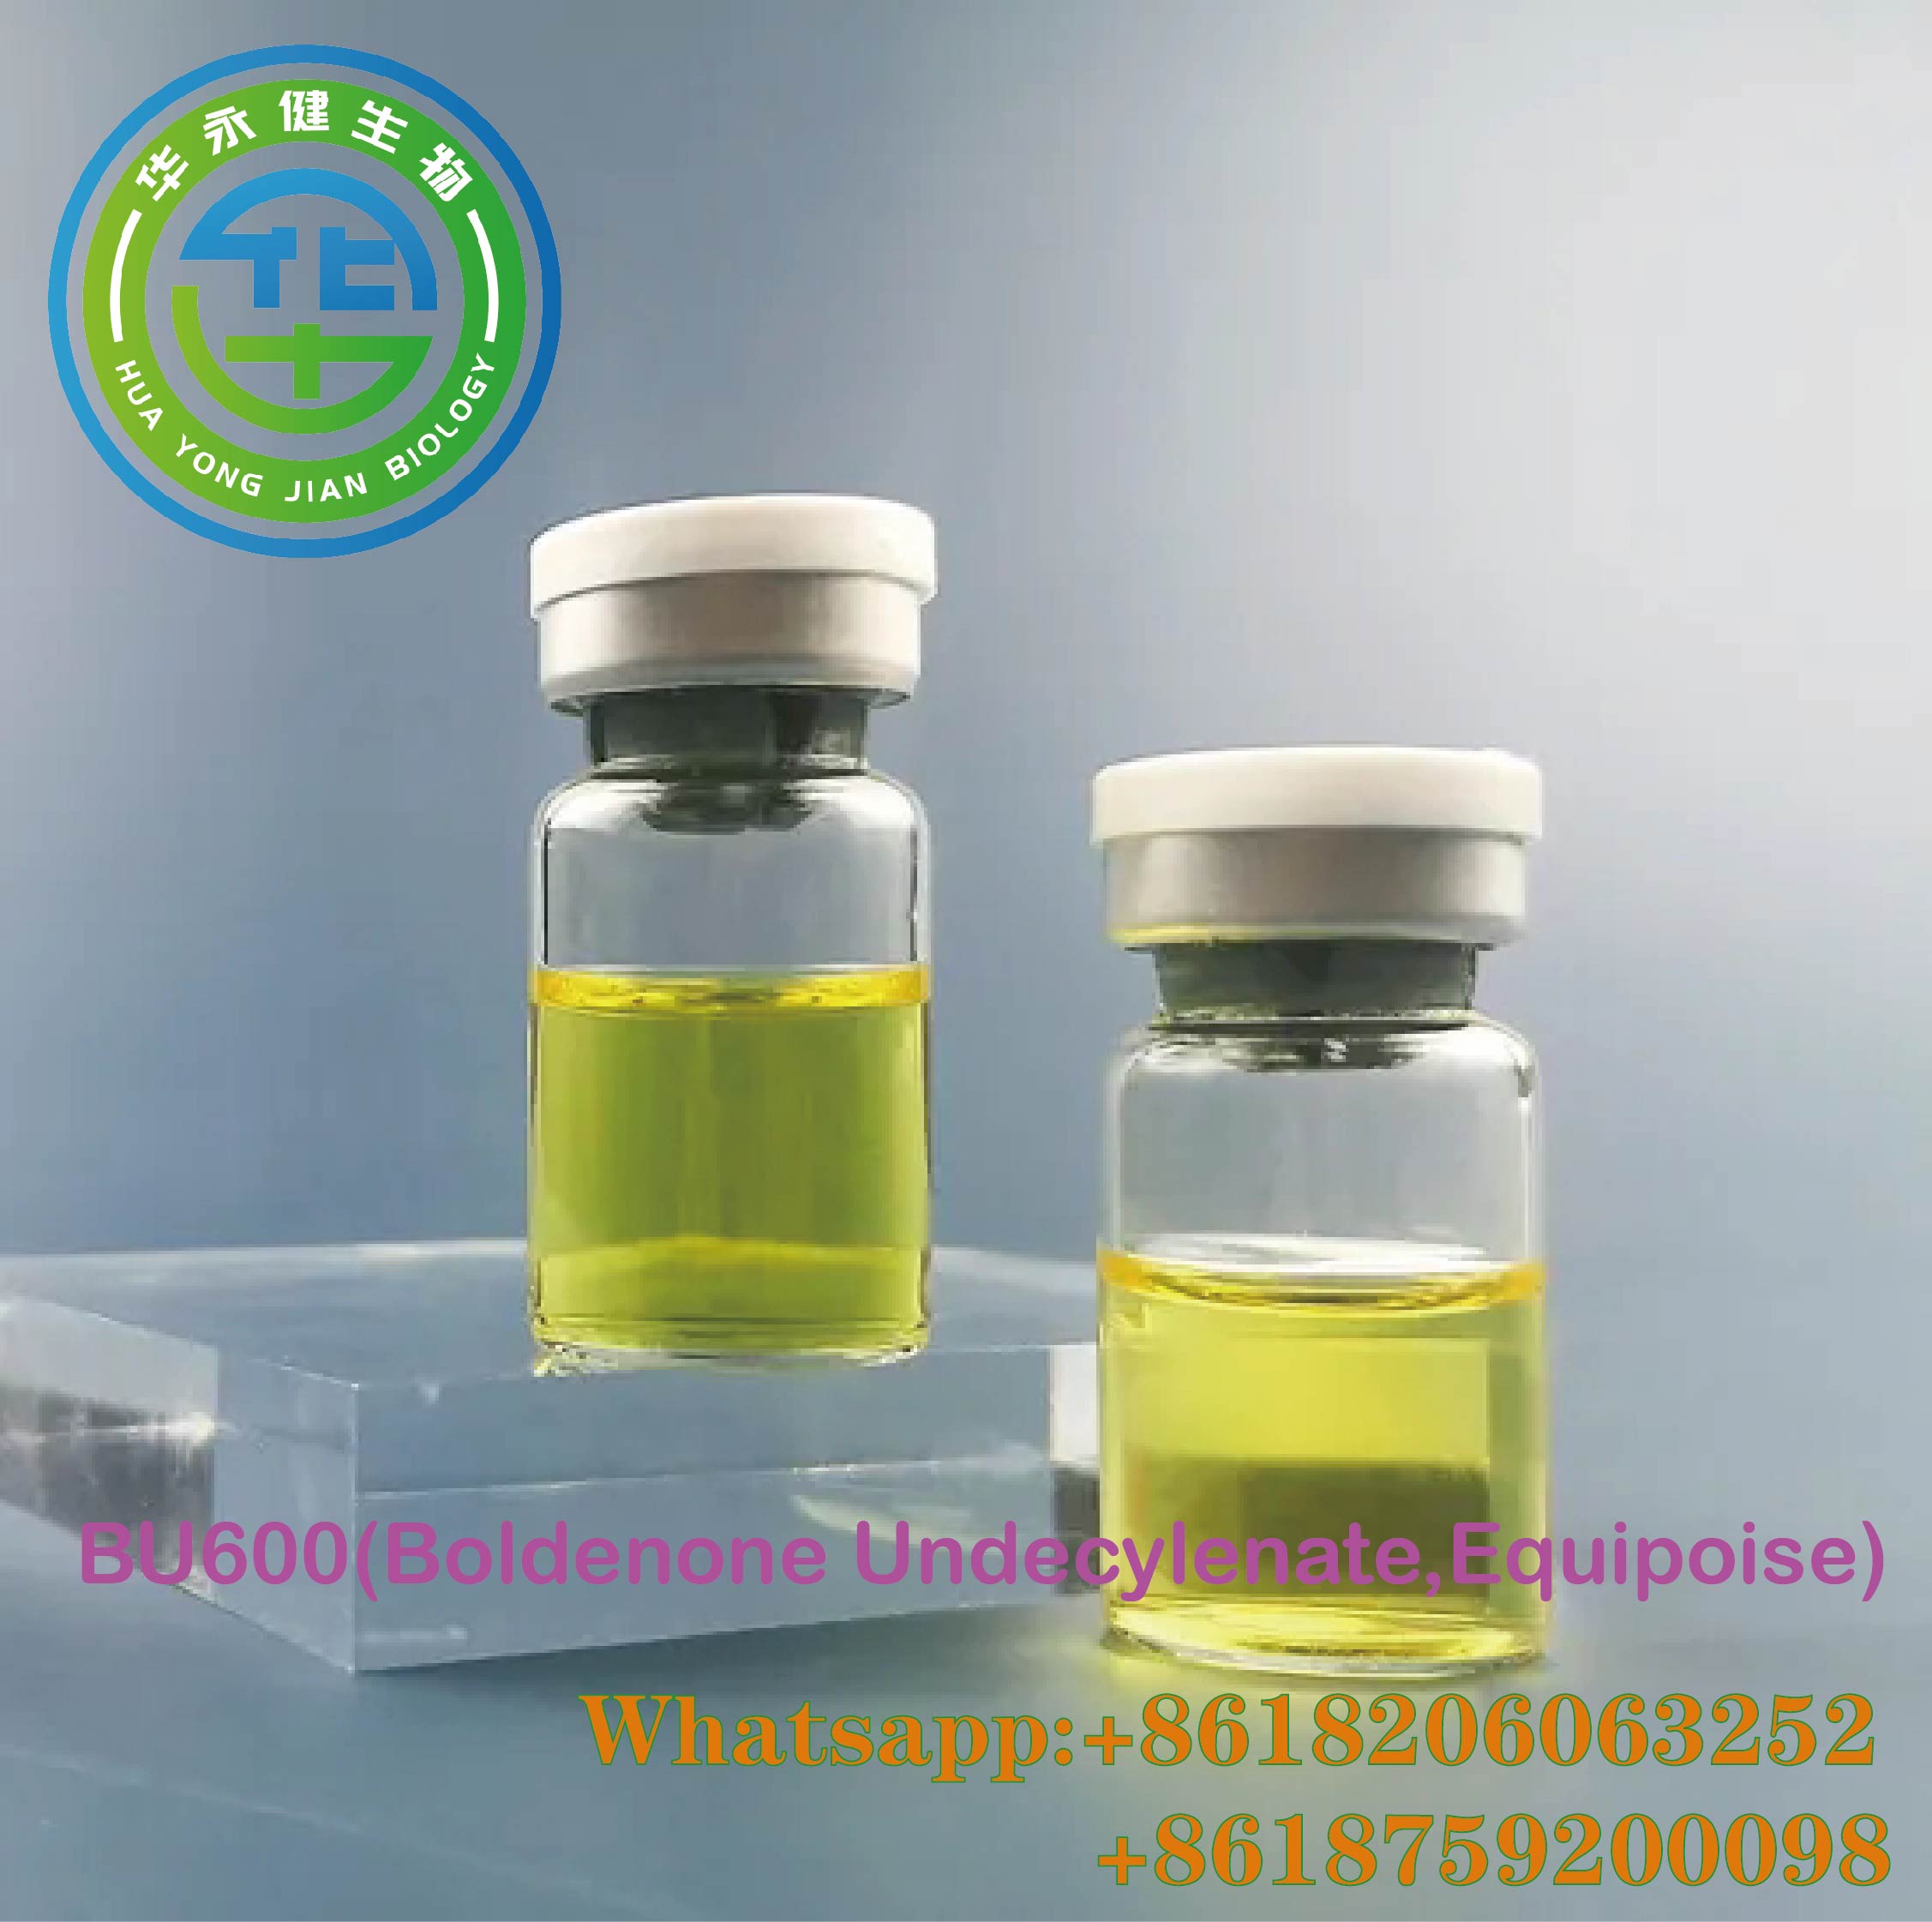 Injectable Oil Liquid Boldenone Undecylenate 600mg/ml for Bodybuilding Bu Equipoise  600